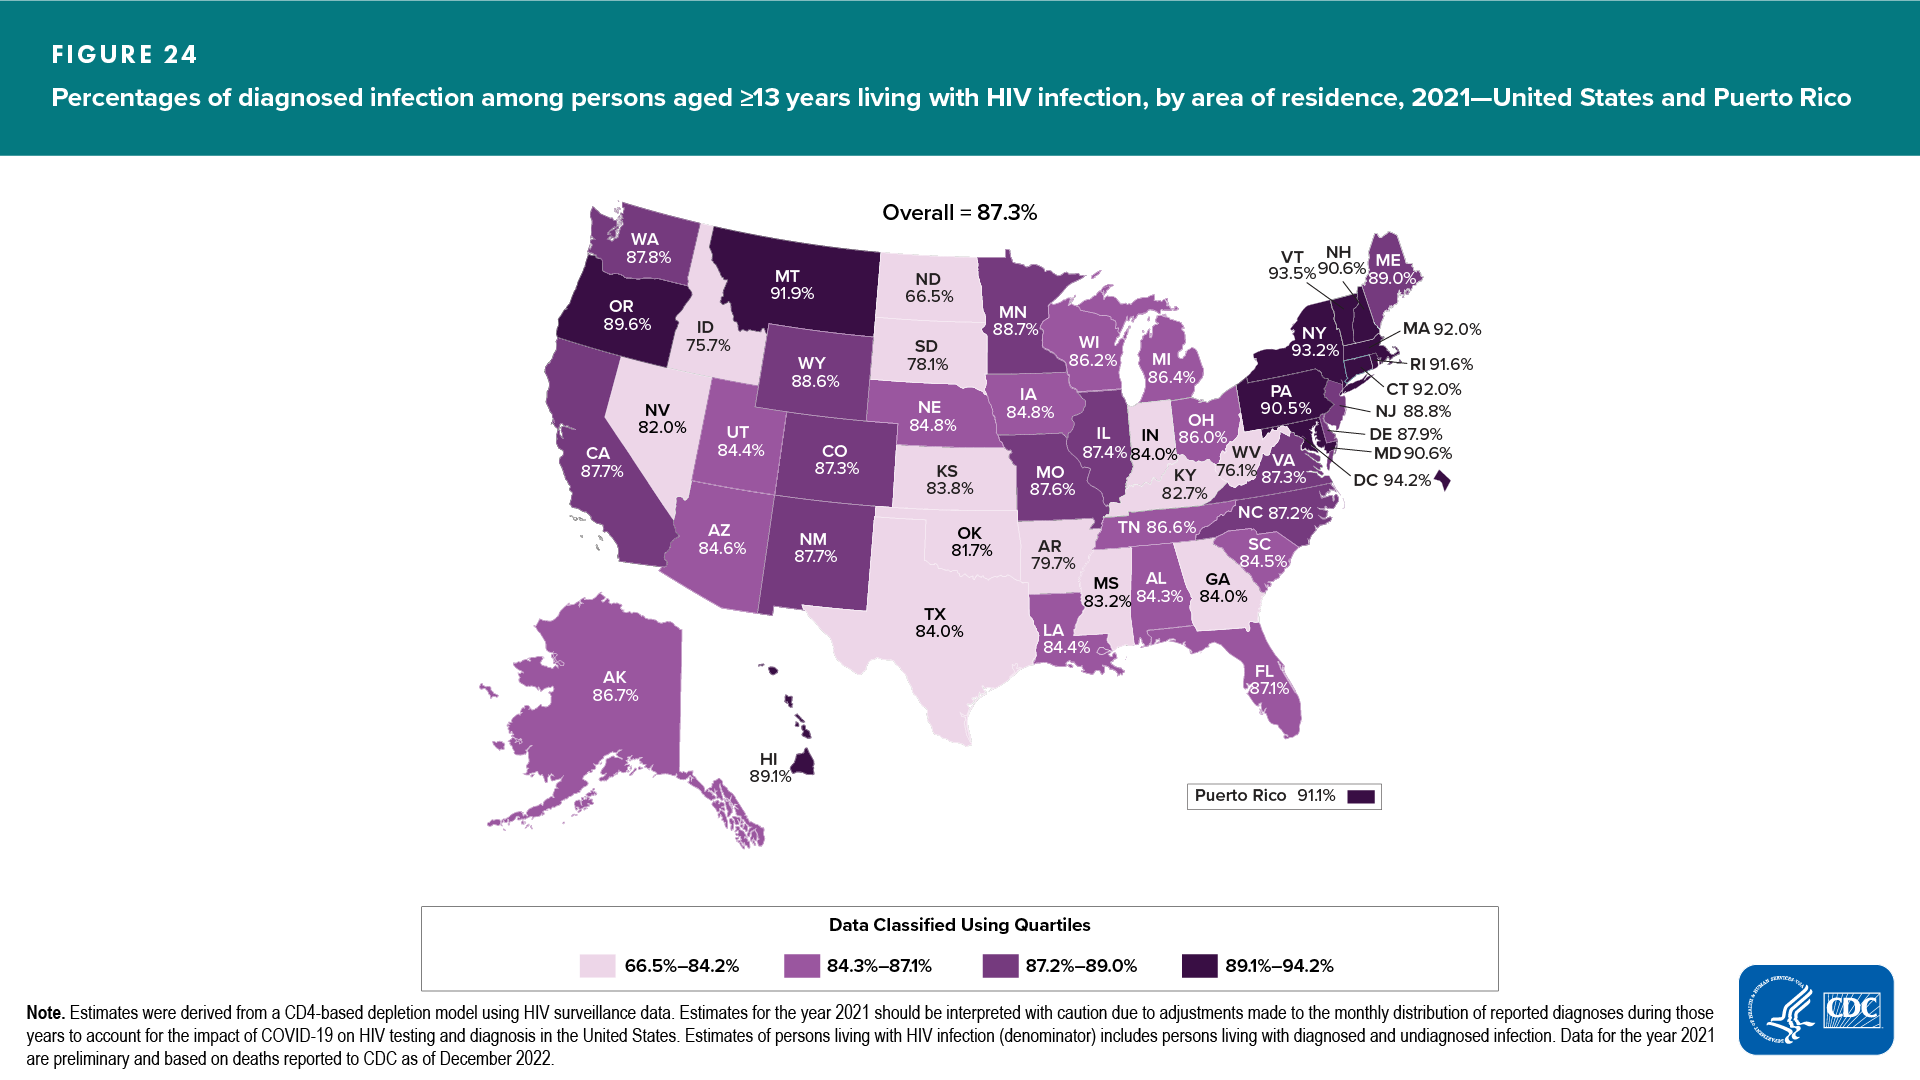 Figure 24. Diagnosed infection among persons aged ≥13 years living with HIV infection, by area of residence, 2021—United States and Puerto Rico